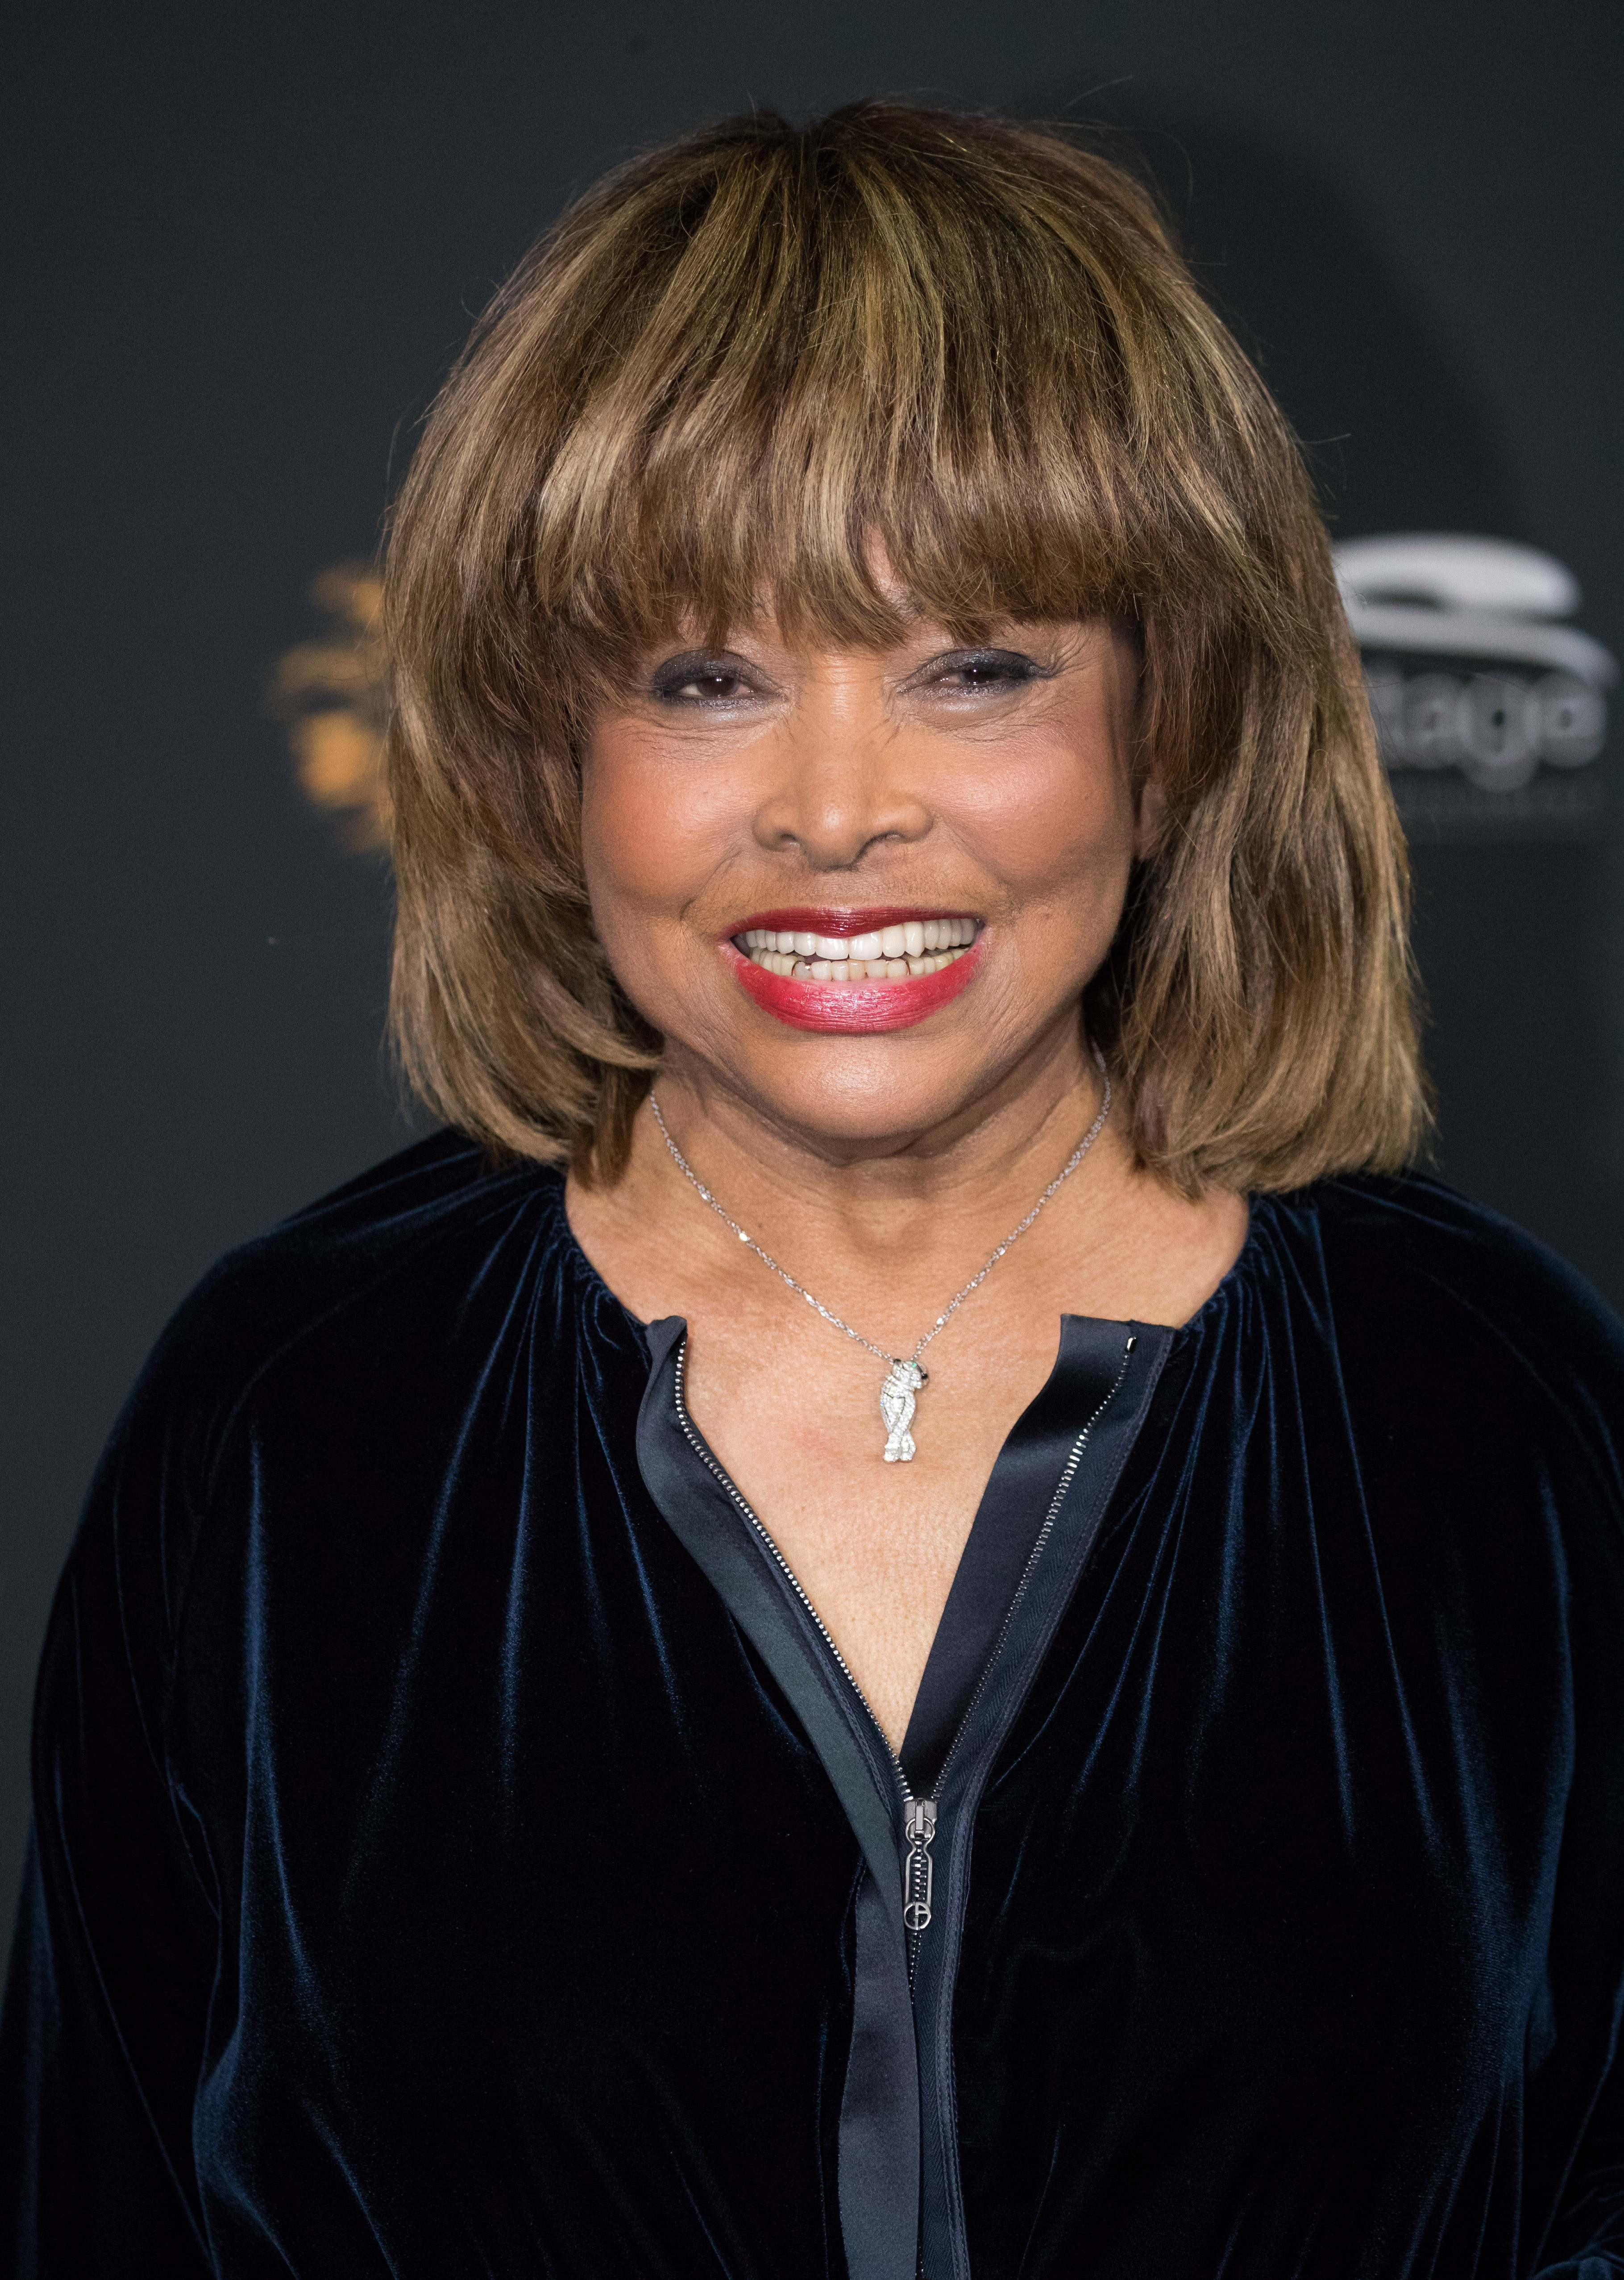 Tina Turner during a photocall for "TINA: The Tina Turner Musical" in Hamburg in 2018 | Source: Getty Images